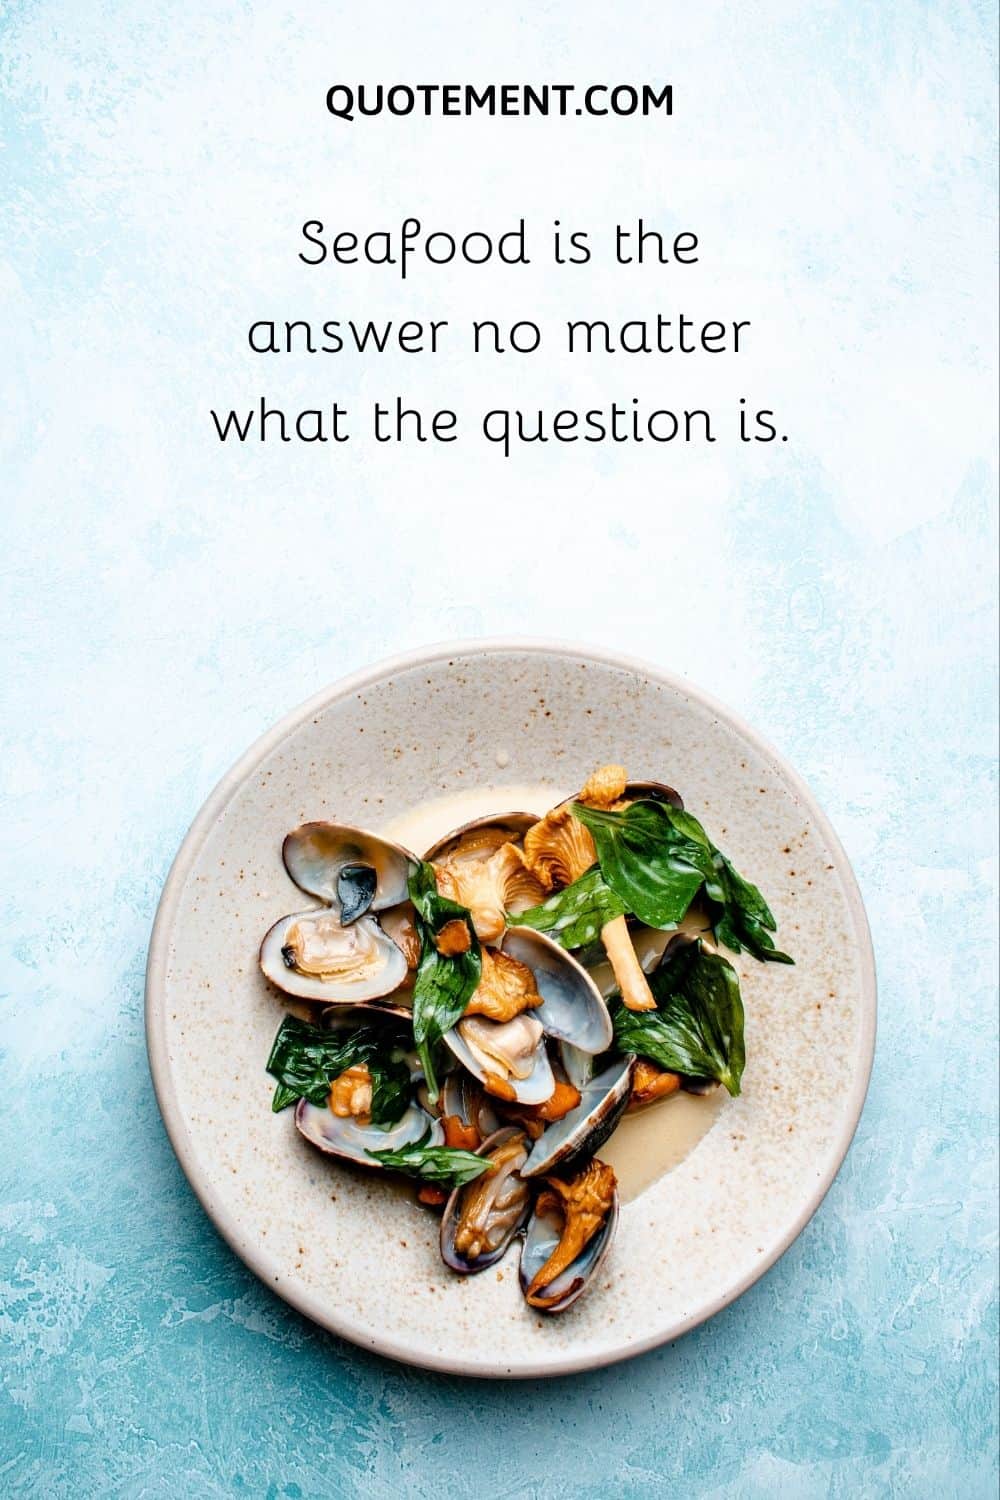 Seafood is the answer no matter what the question is.